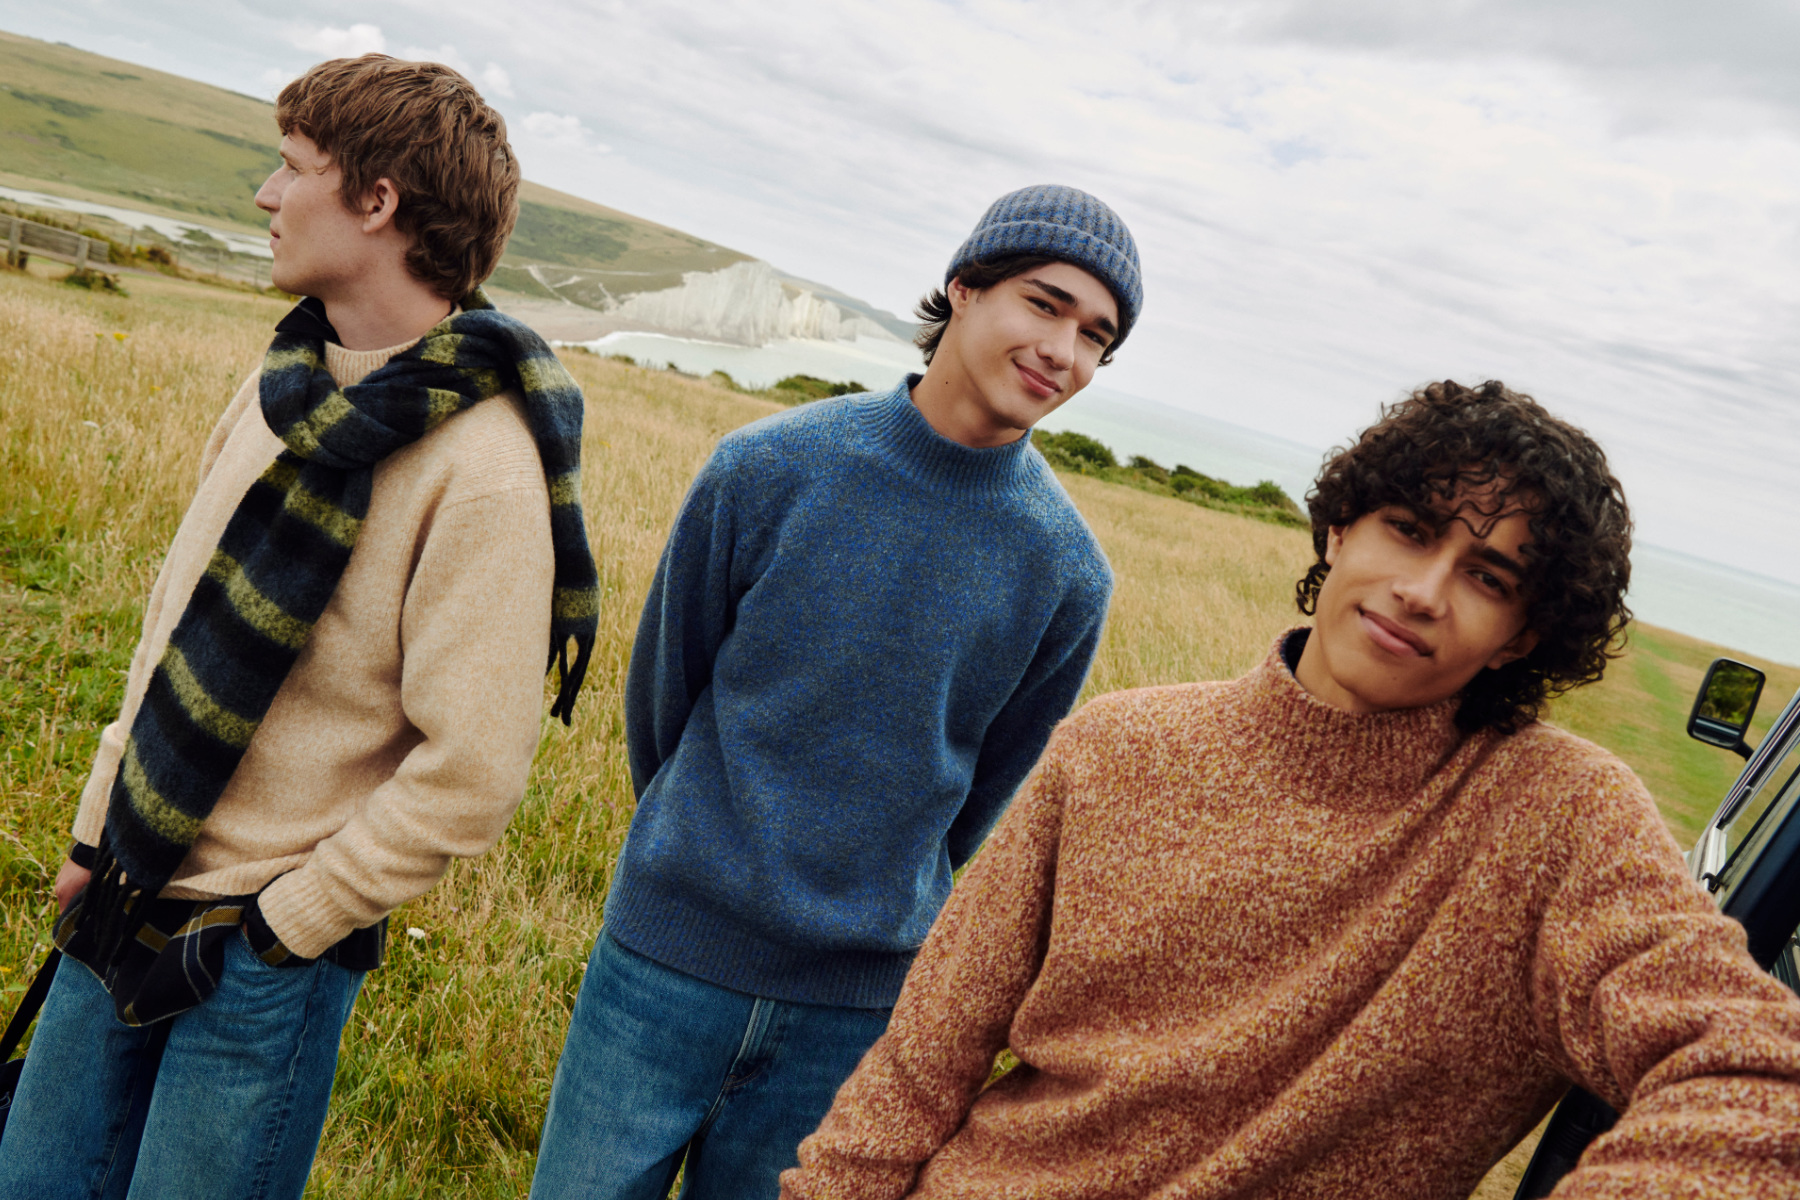 A.P.C. x JW Anderson Collaboration Release Info